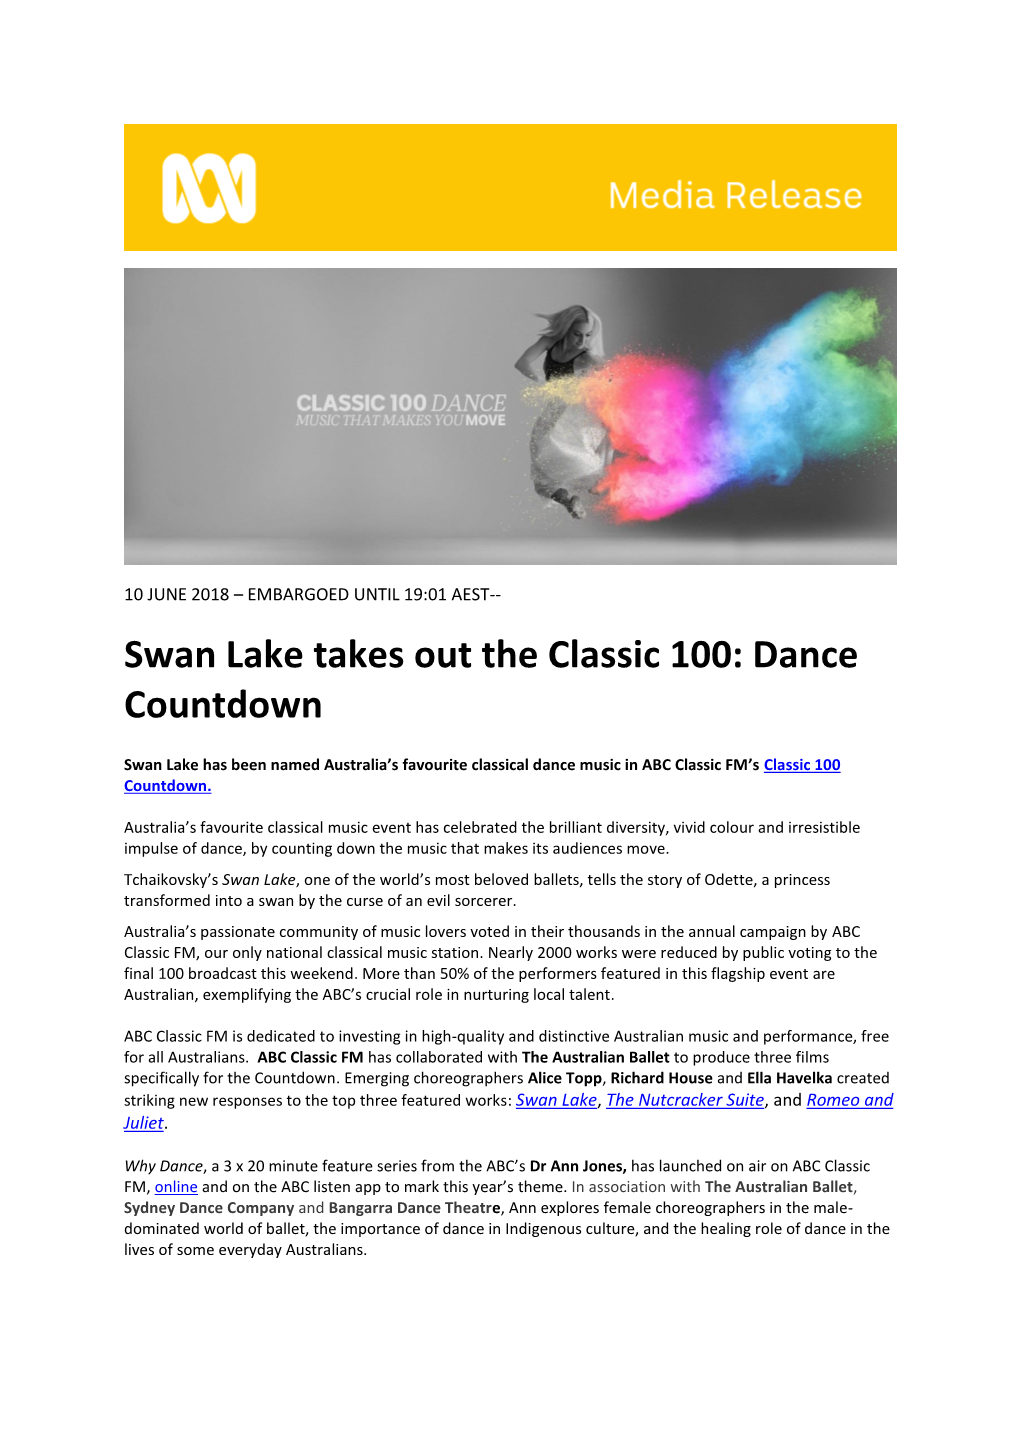 Swan Lake Takes out the Classic 100: Dance Countdown